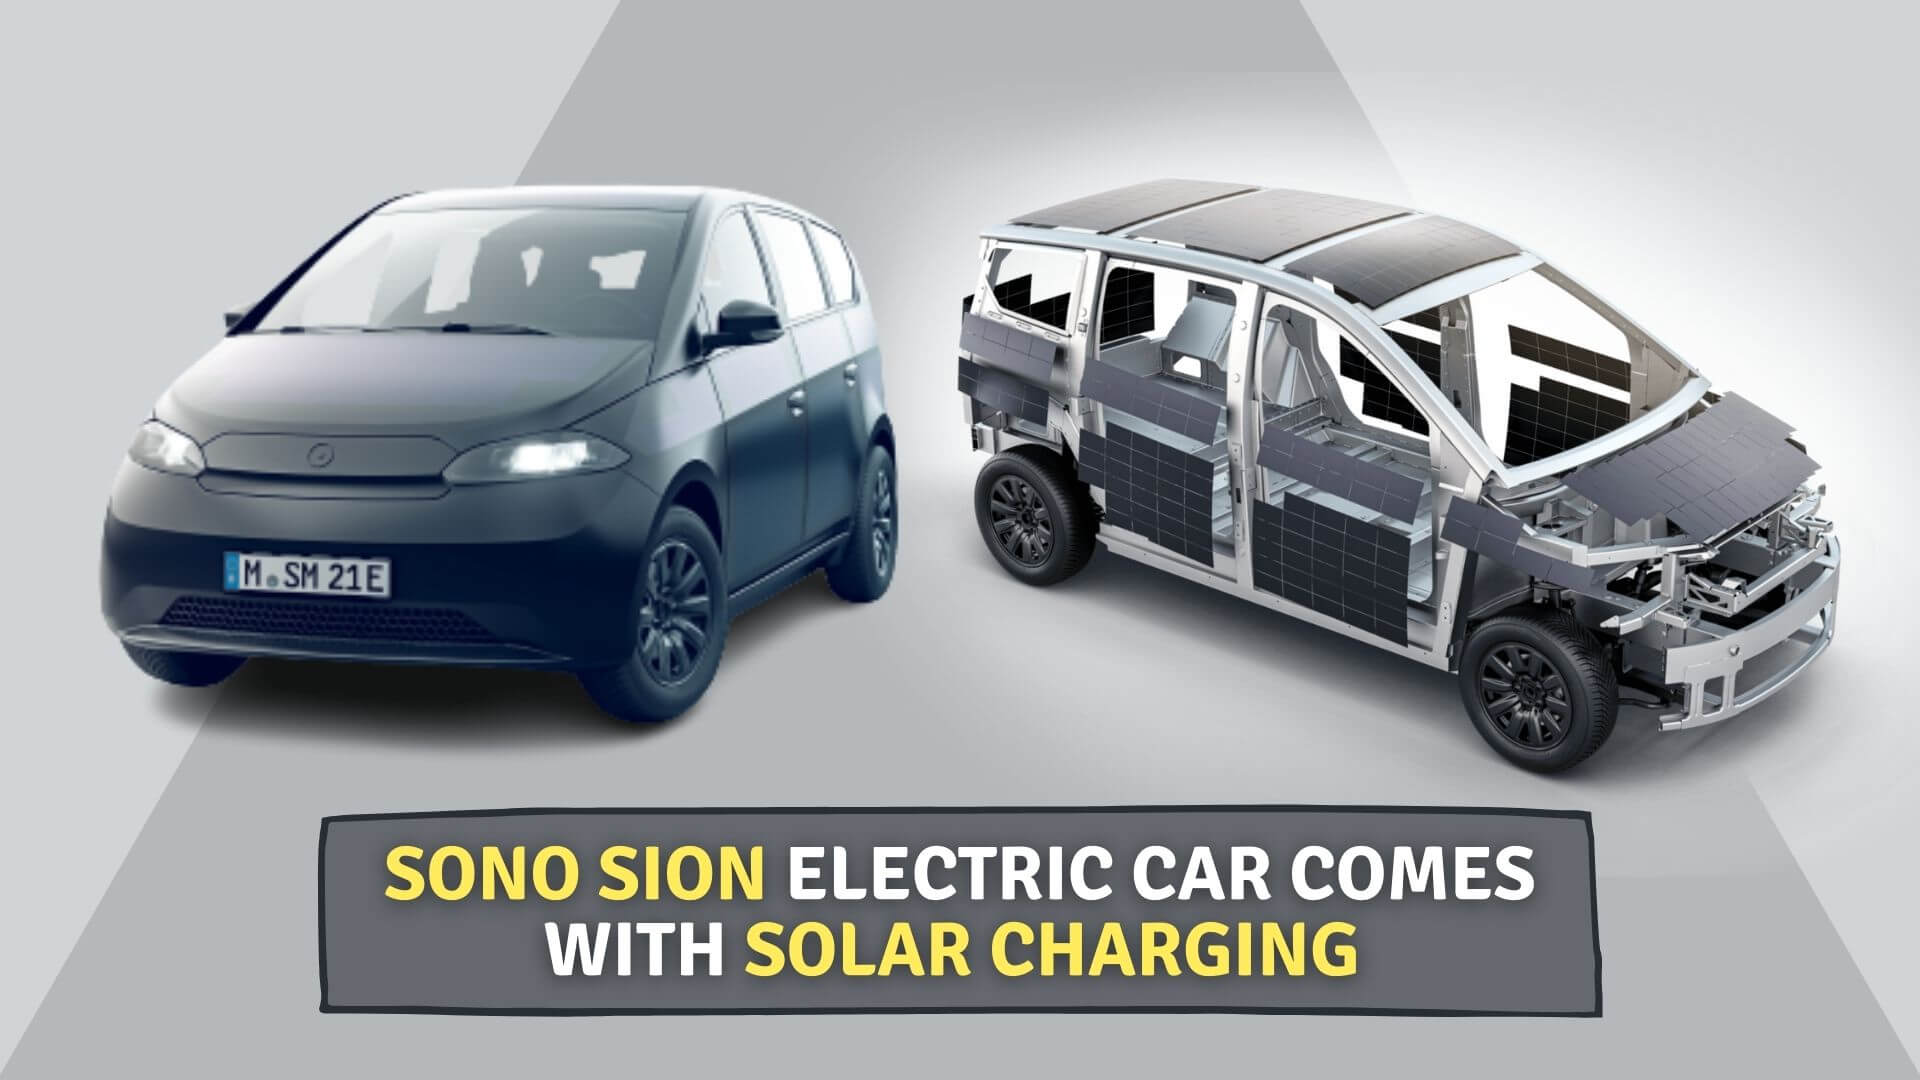 https://e-vehicleinfo.com/sono-sion-electric-car-comes-with-solar-charging/